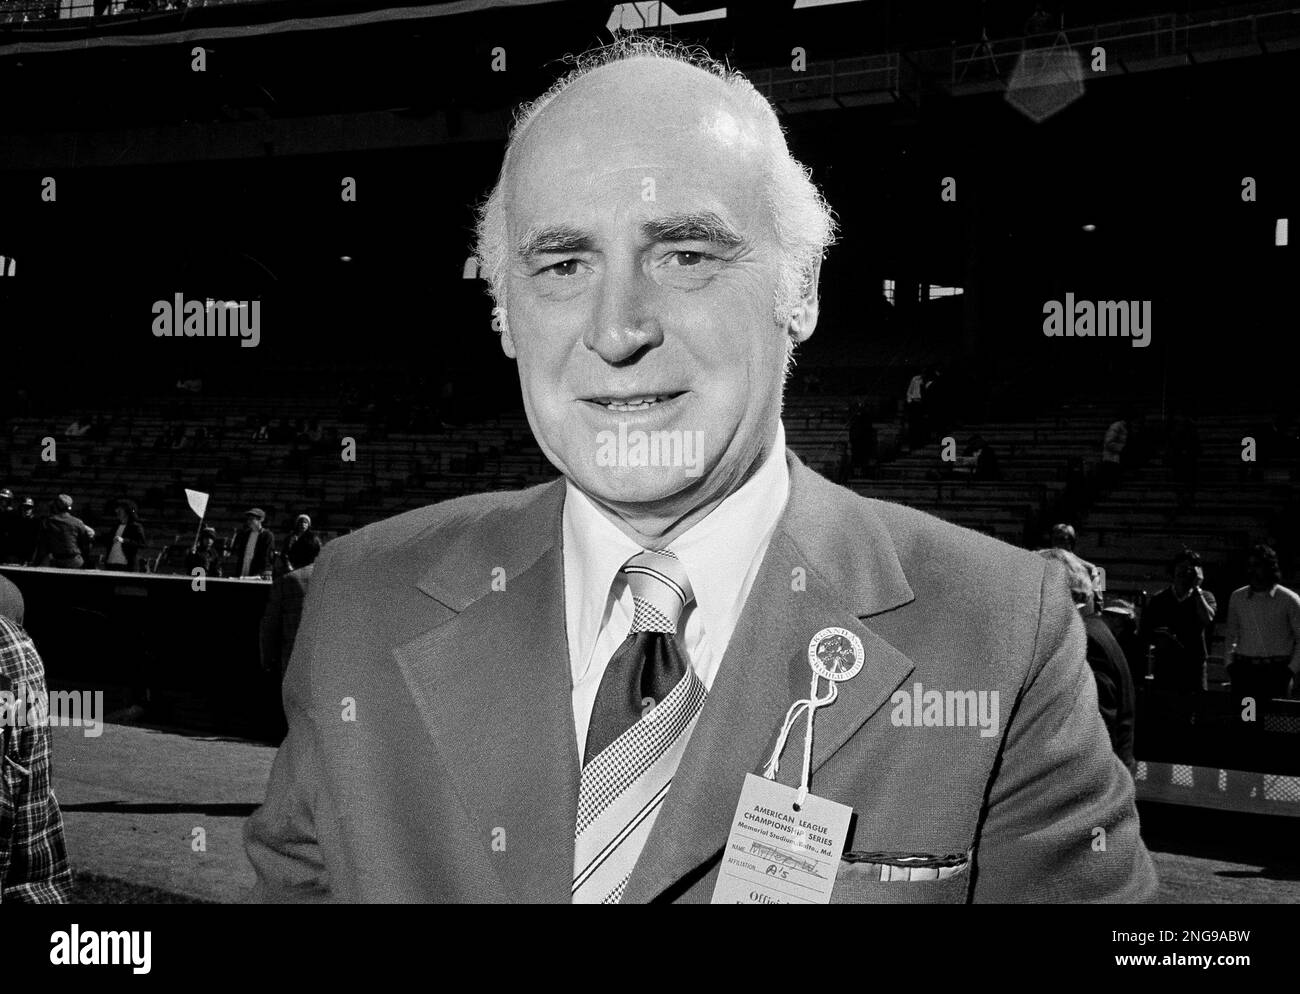 1970s Baseball - 1974: Oakland A's Owner Charlie Finley poses with